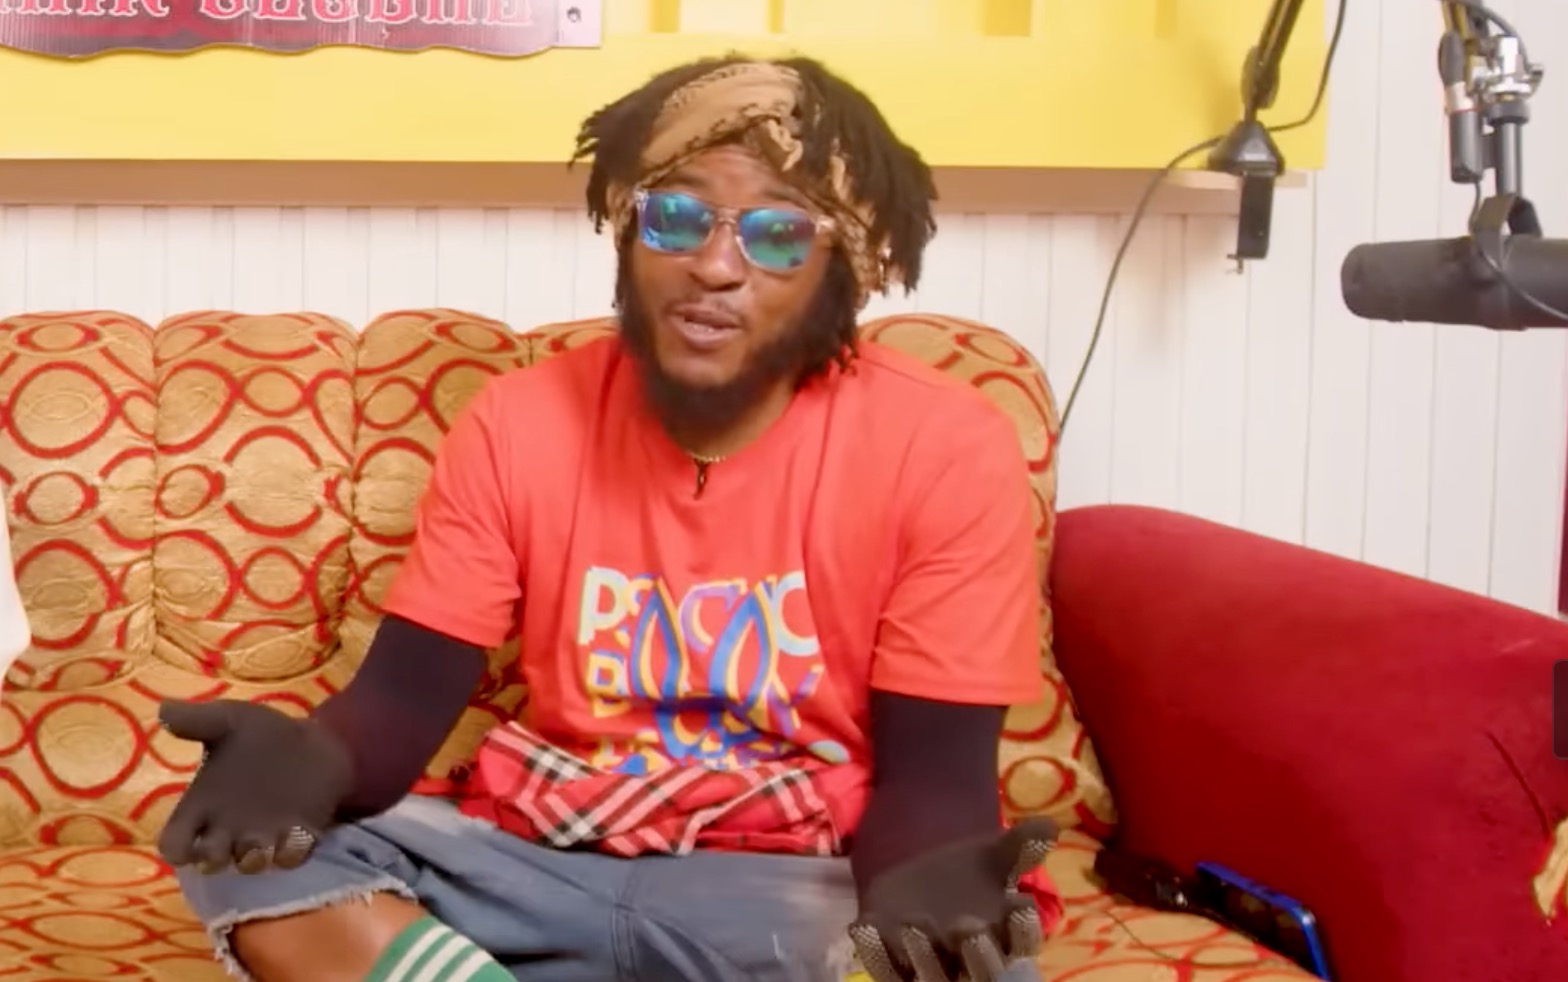 Khago Advises Kartel to be 22Humble22 and Speaks About the State of Dancehall and Why Kartel is Needed Watch Interview